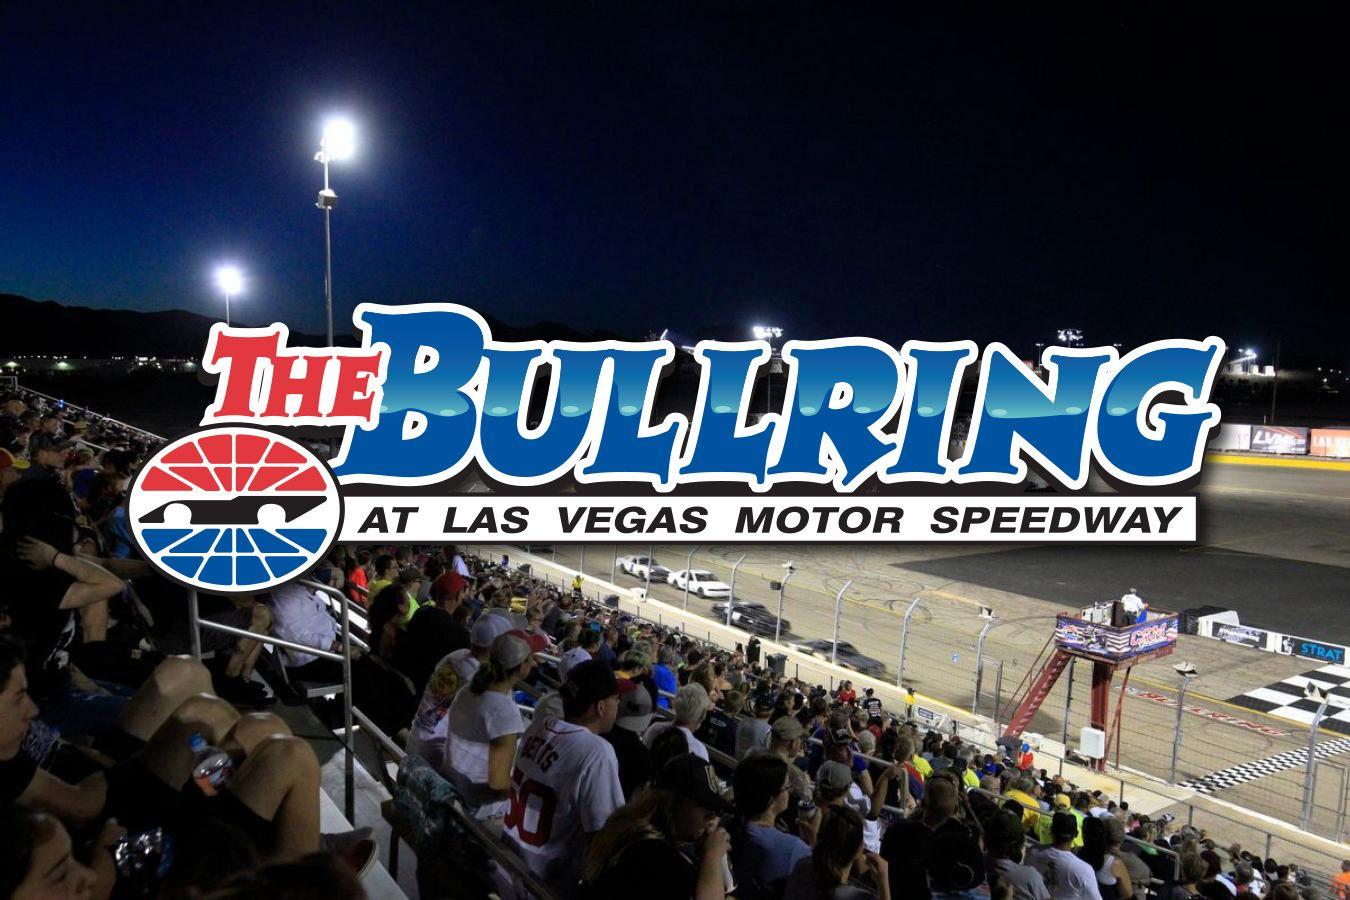 lvms-bullring-returns-in-2022-with-12-race-schedule-the-bomber-nation